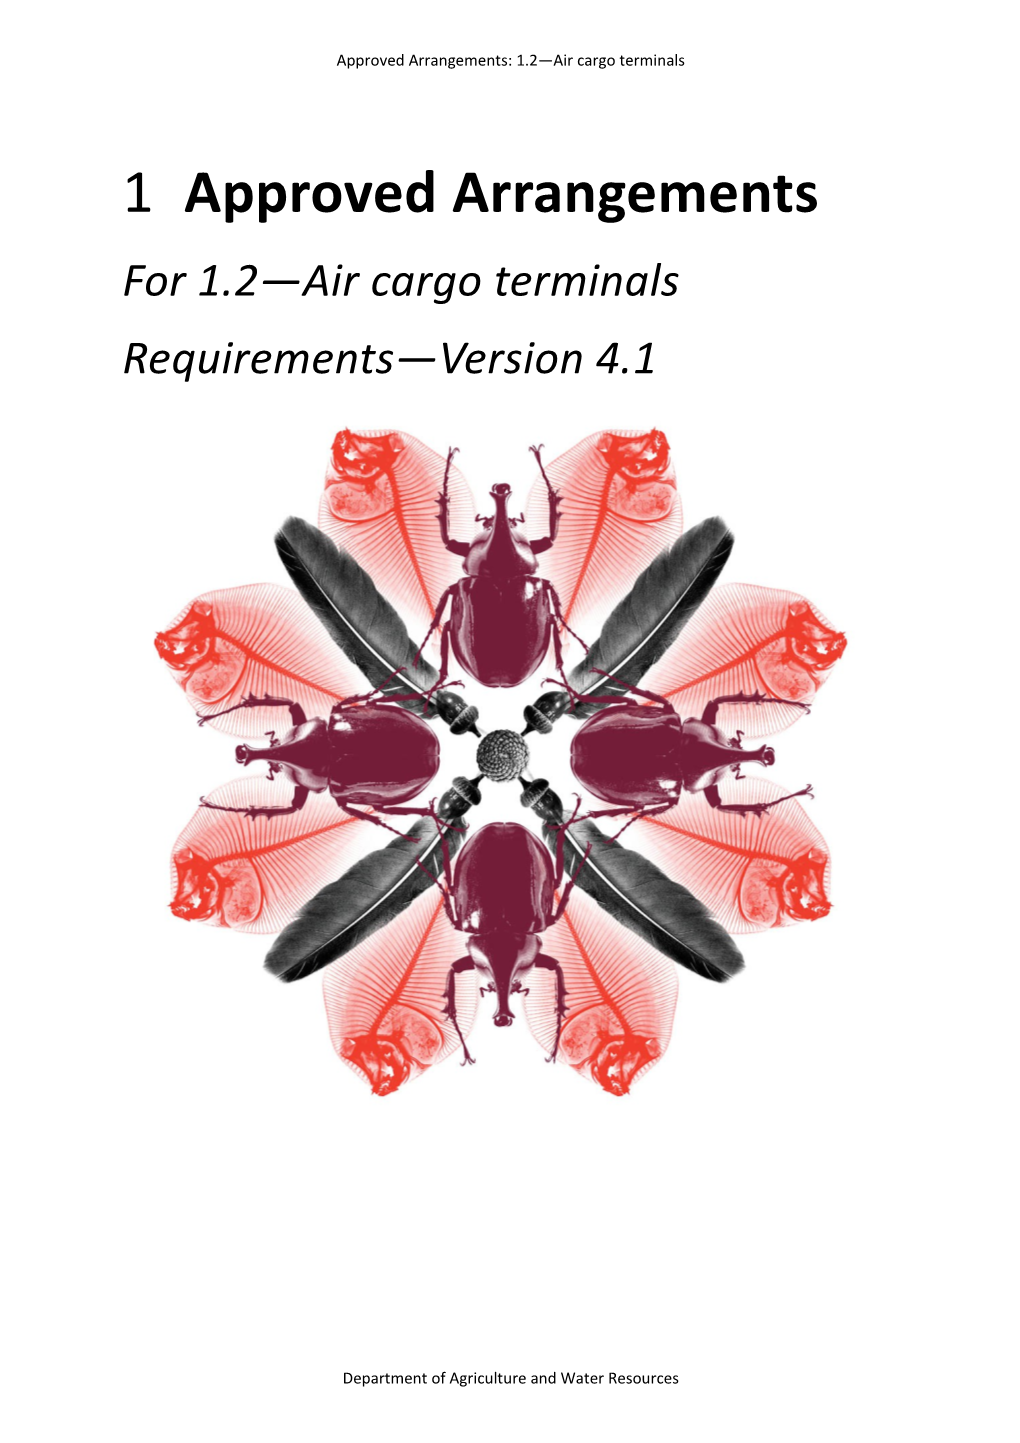 Approved Arrangements for 1.2: Air Cargo Terminals - Requirements